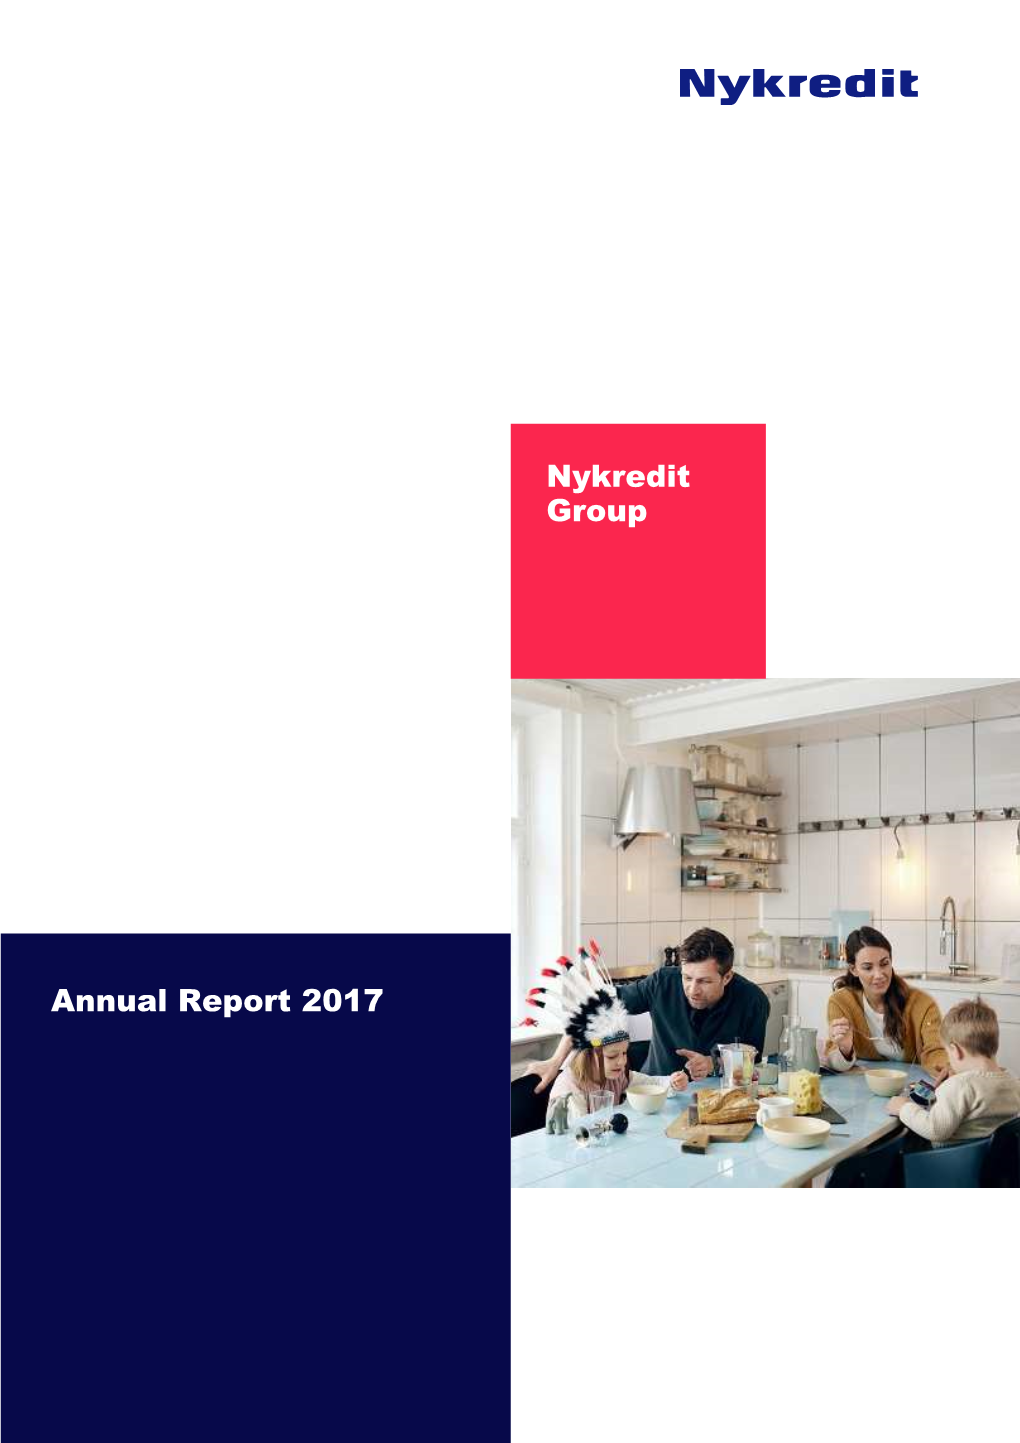 Annual Report 2017 Nykredit Group